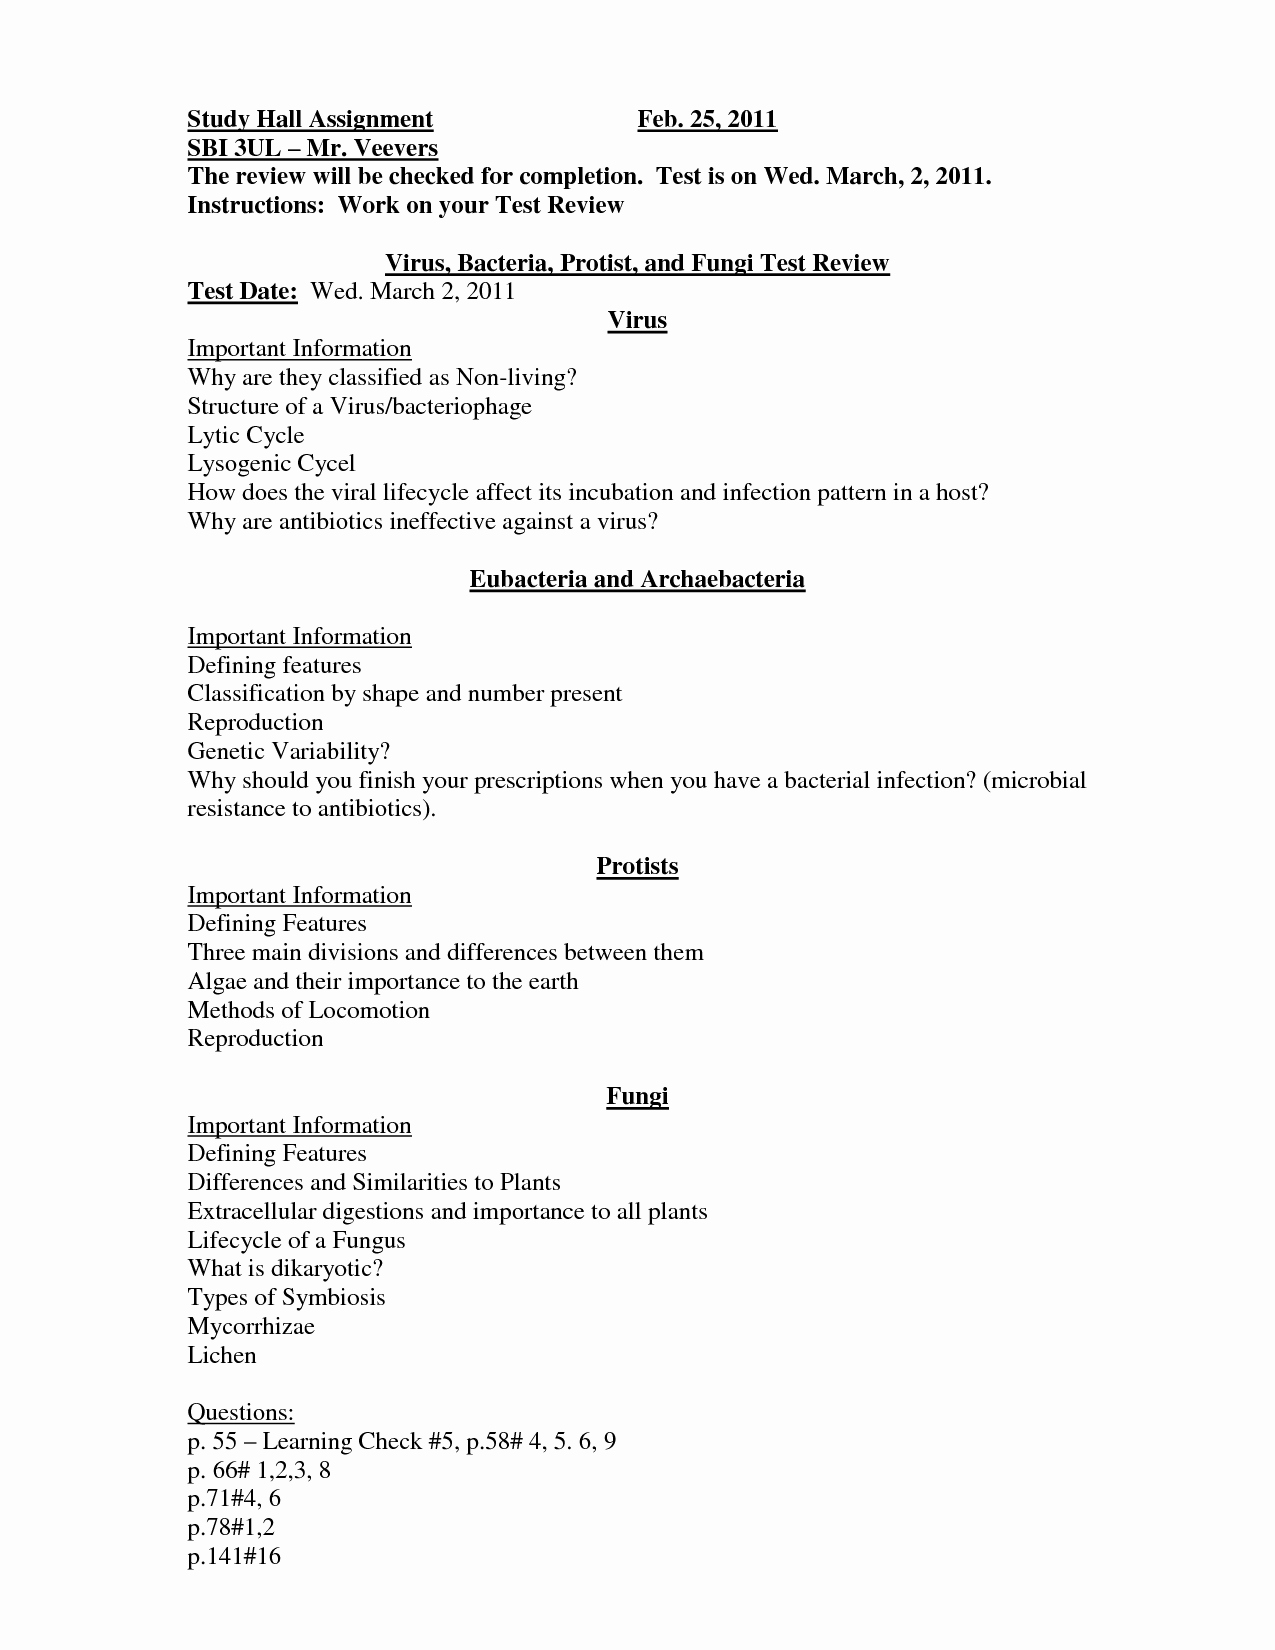 Virus and Bacteria Worksheet Answers Awesome 14 Best Of Viruses and Bacteria Worksheets